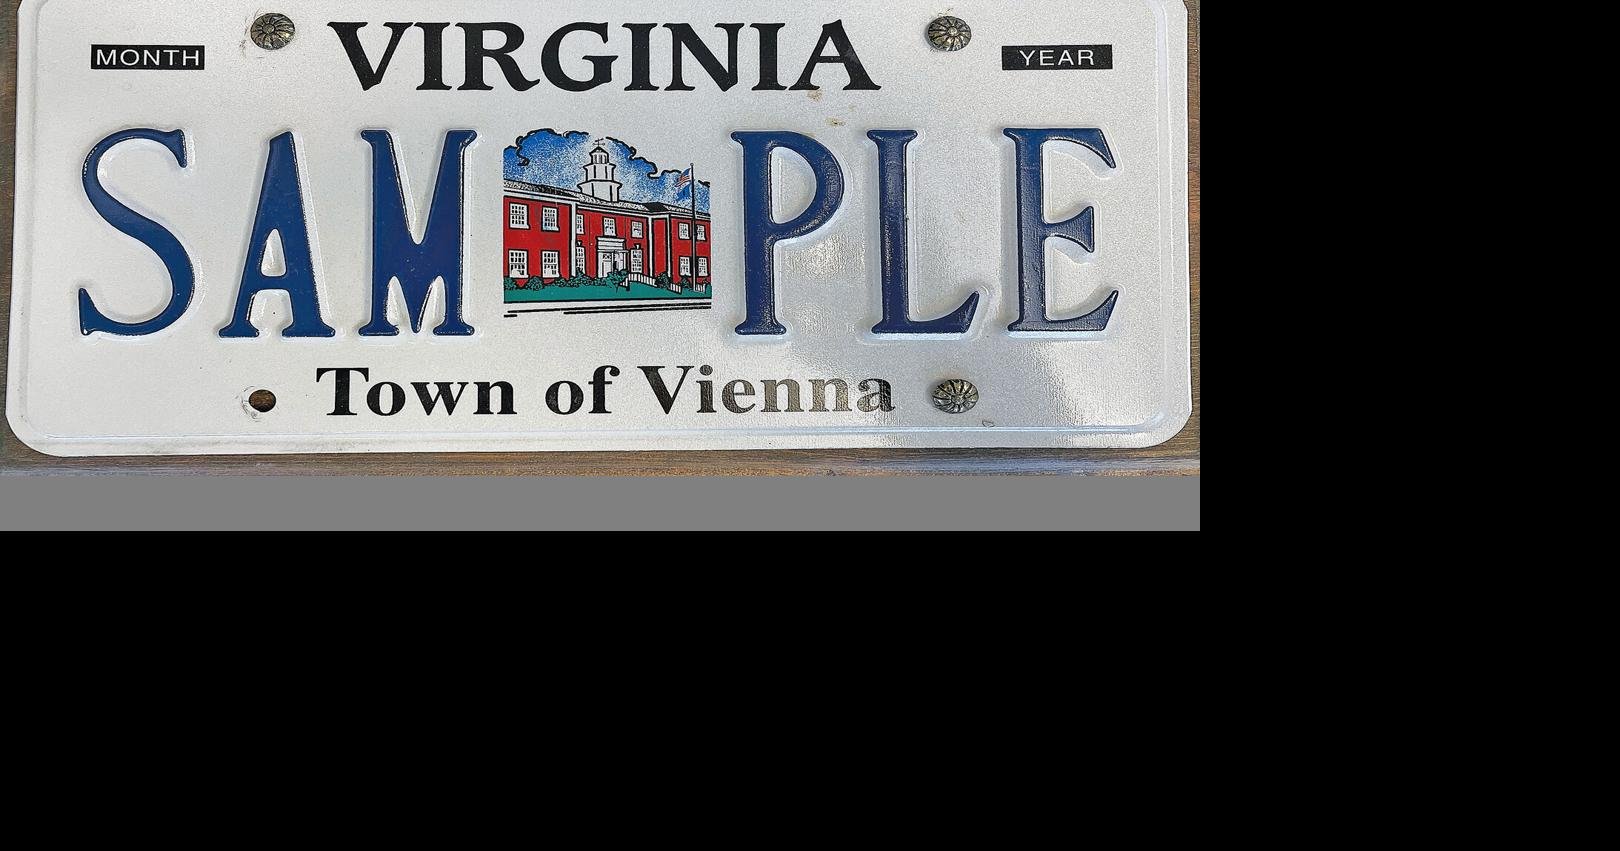 Lewd License Plates and the First Amendment